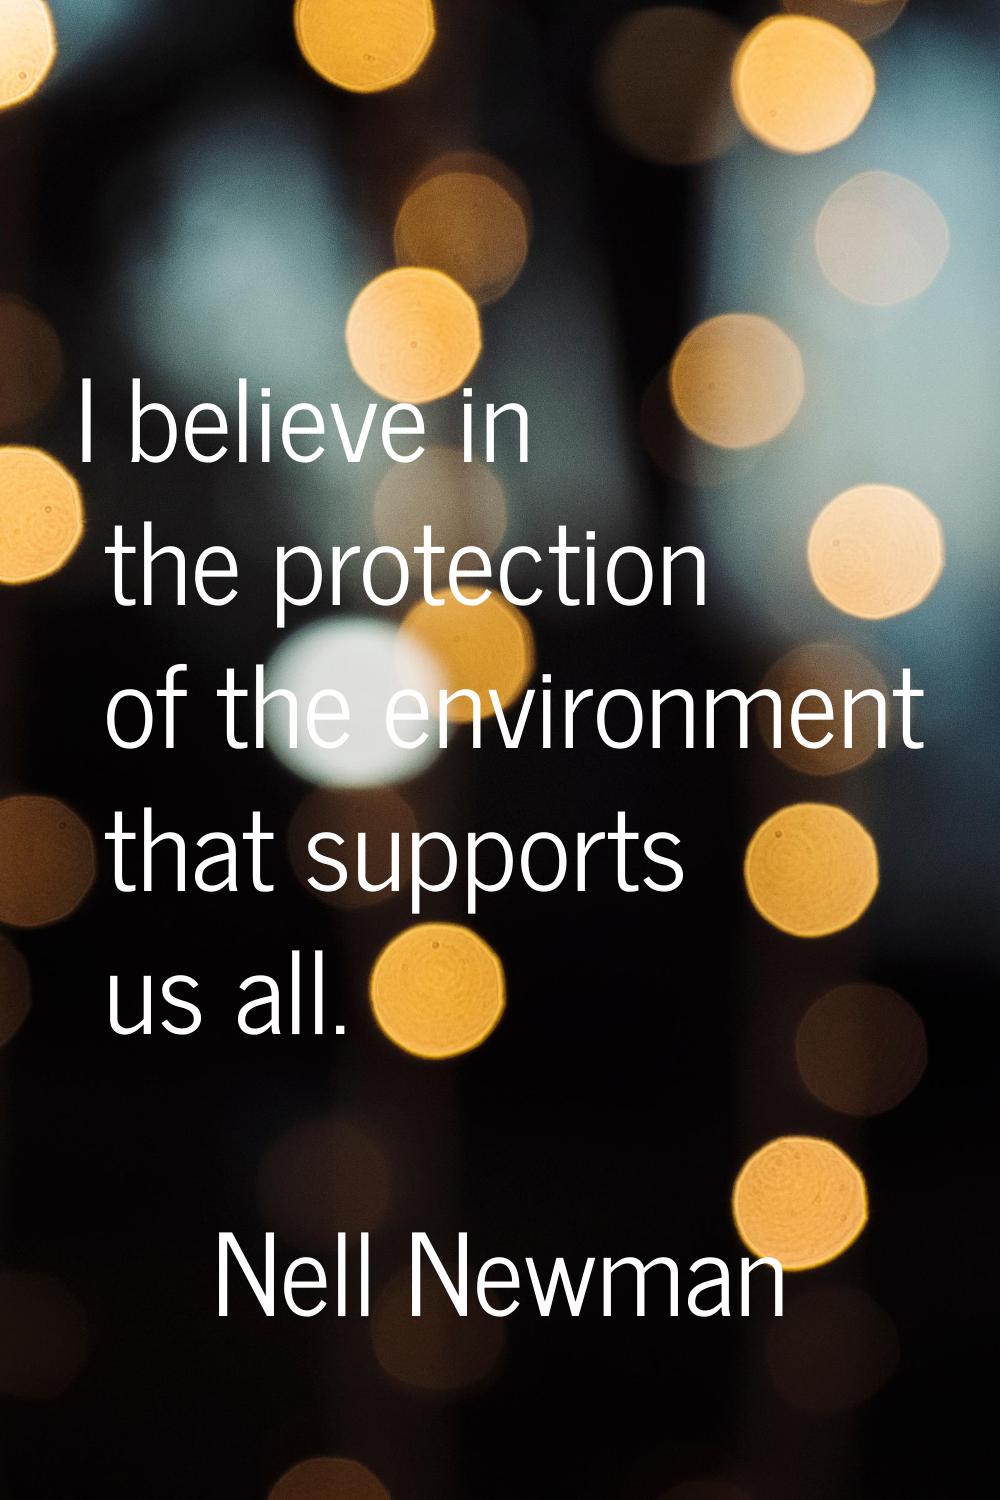 I believe in the protection of the environment that supports us all.